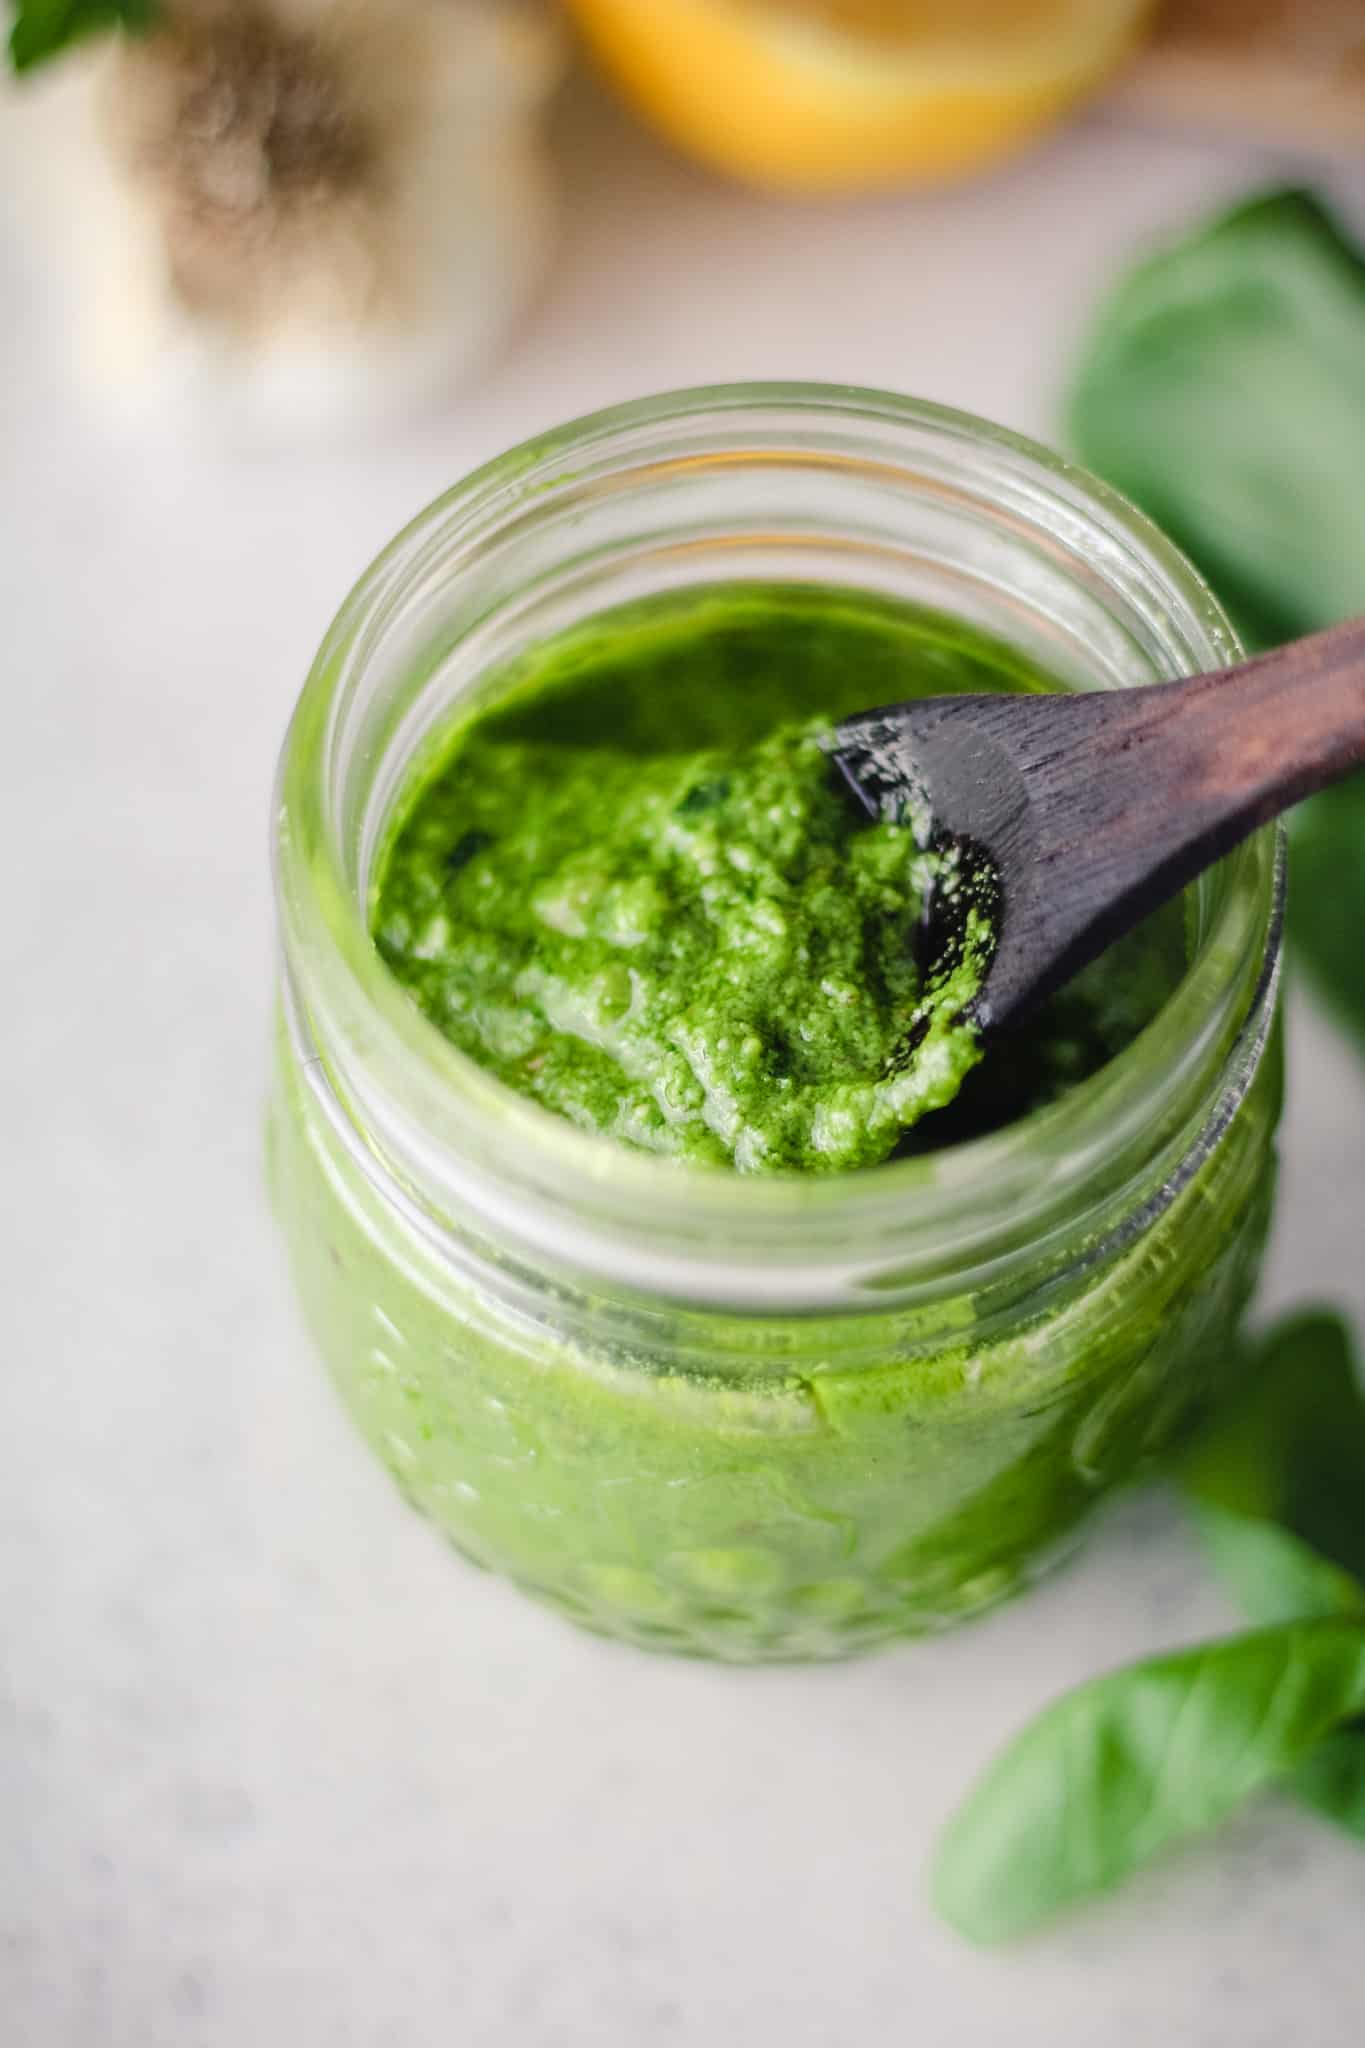 Walnut pesto sauce in a glass jar with a wooden spoon.